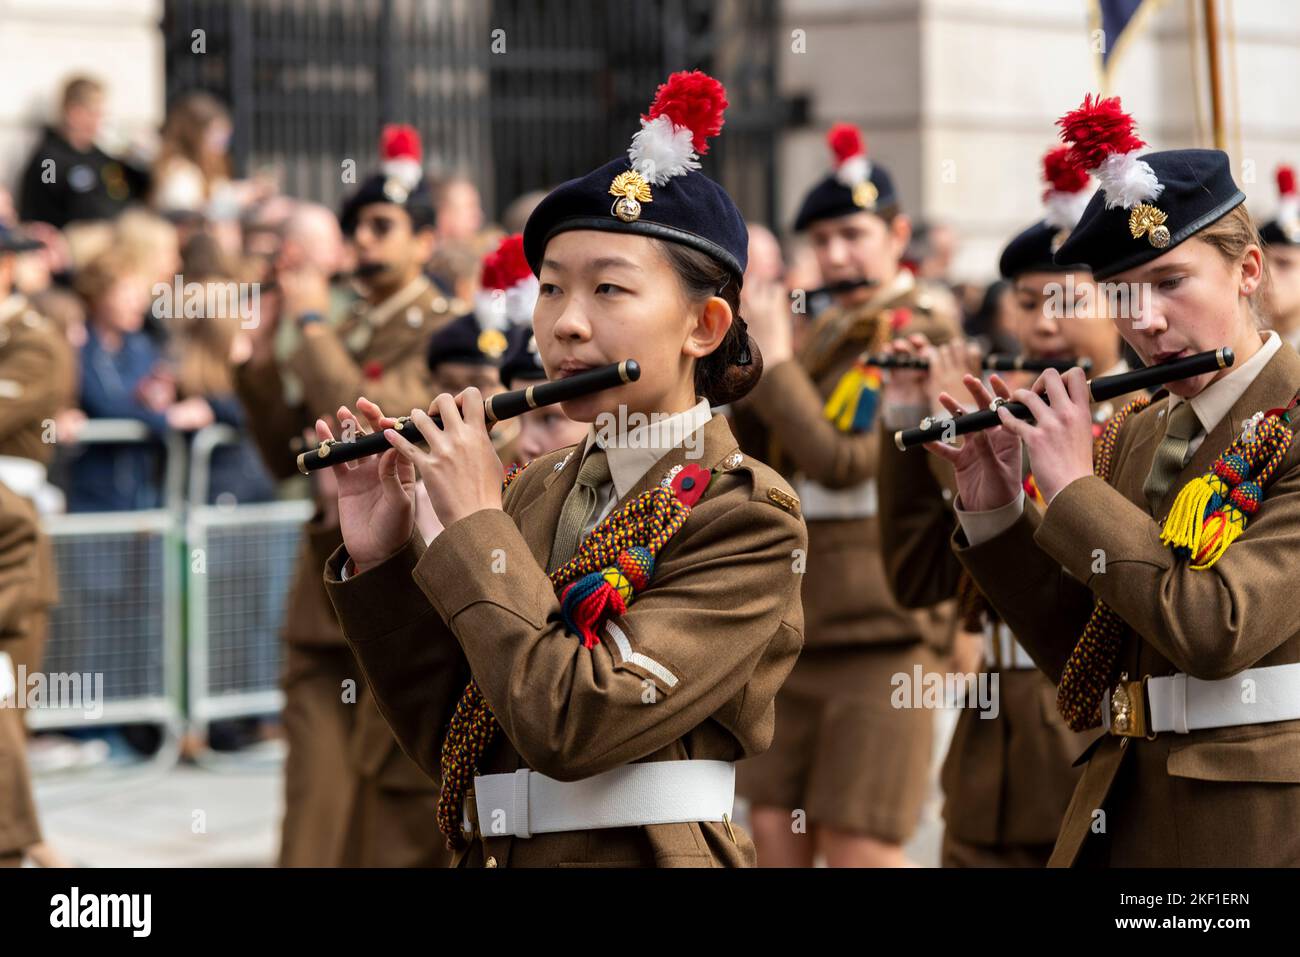 The Royal Regiment of Fusiliers band at the Lord Mayor's Show parade in the City of London, UK. Combined Cadet Force Stock Photo